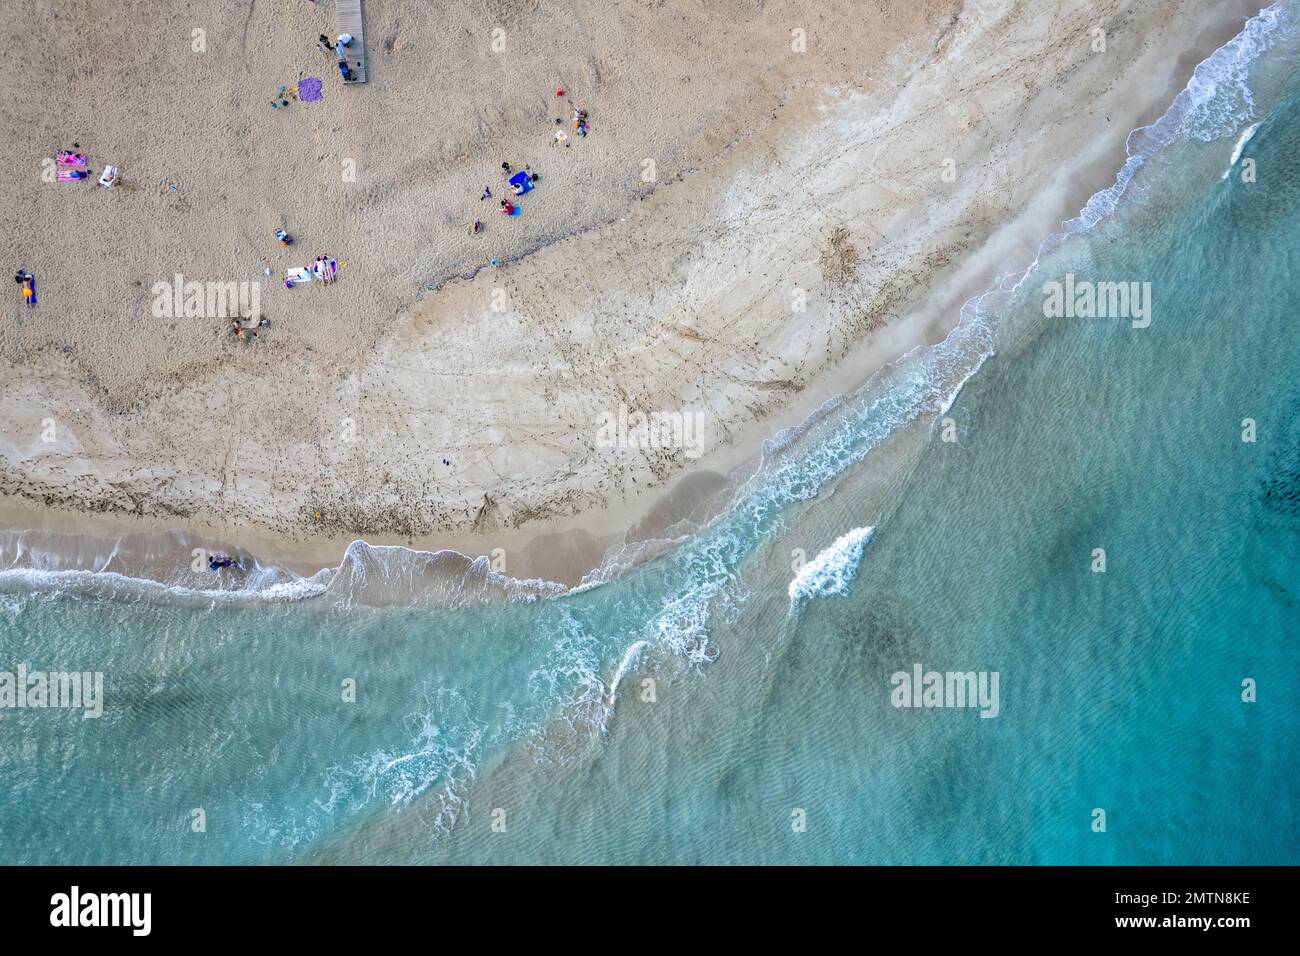 Drone aerial of people relaxing in a sandy beach in winter. Fog tree bay beach, holiday resort Protaras Cyprus. Stock Photo